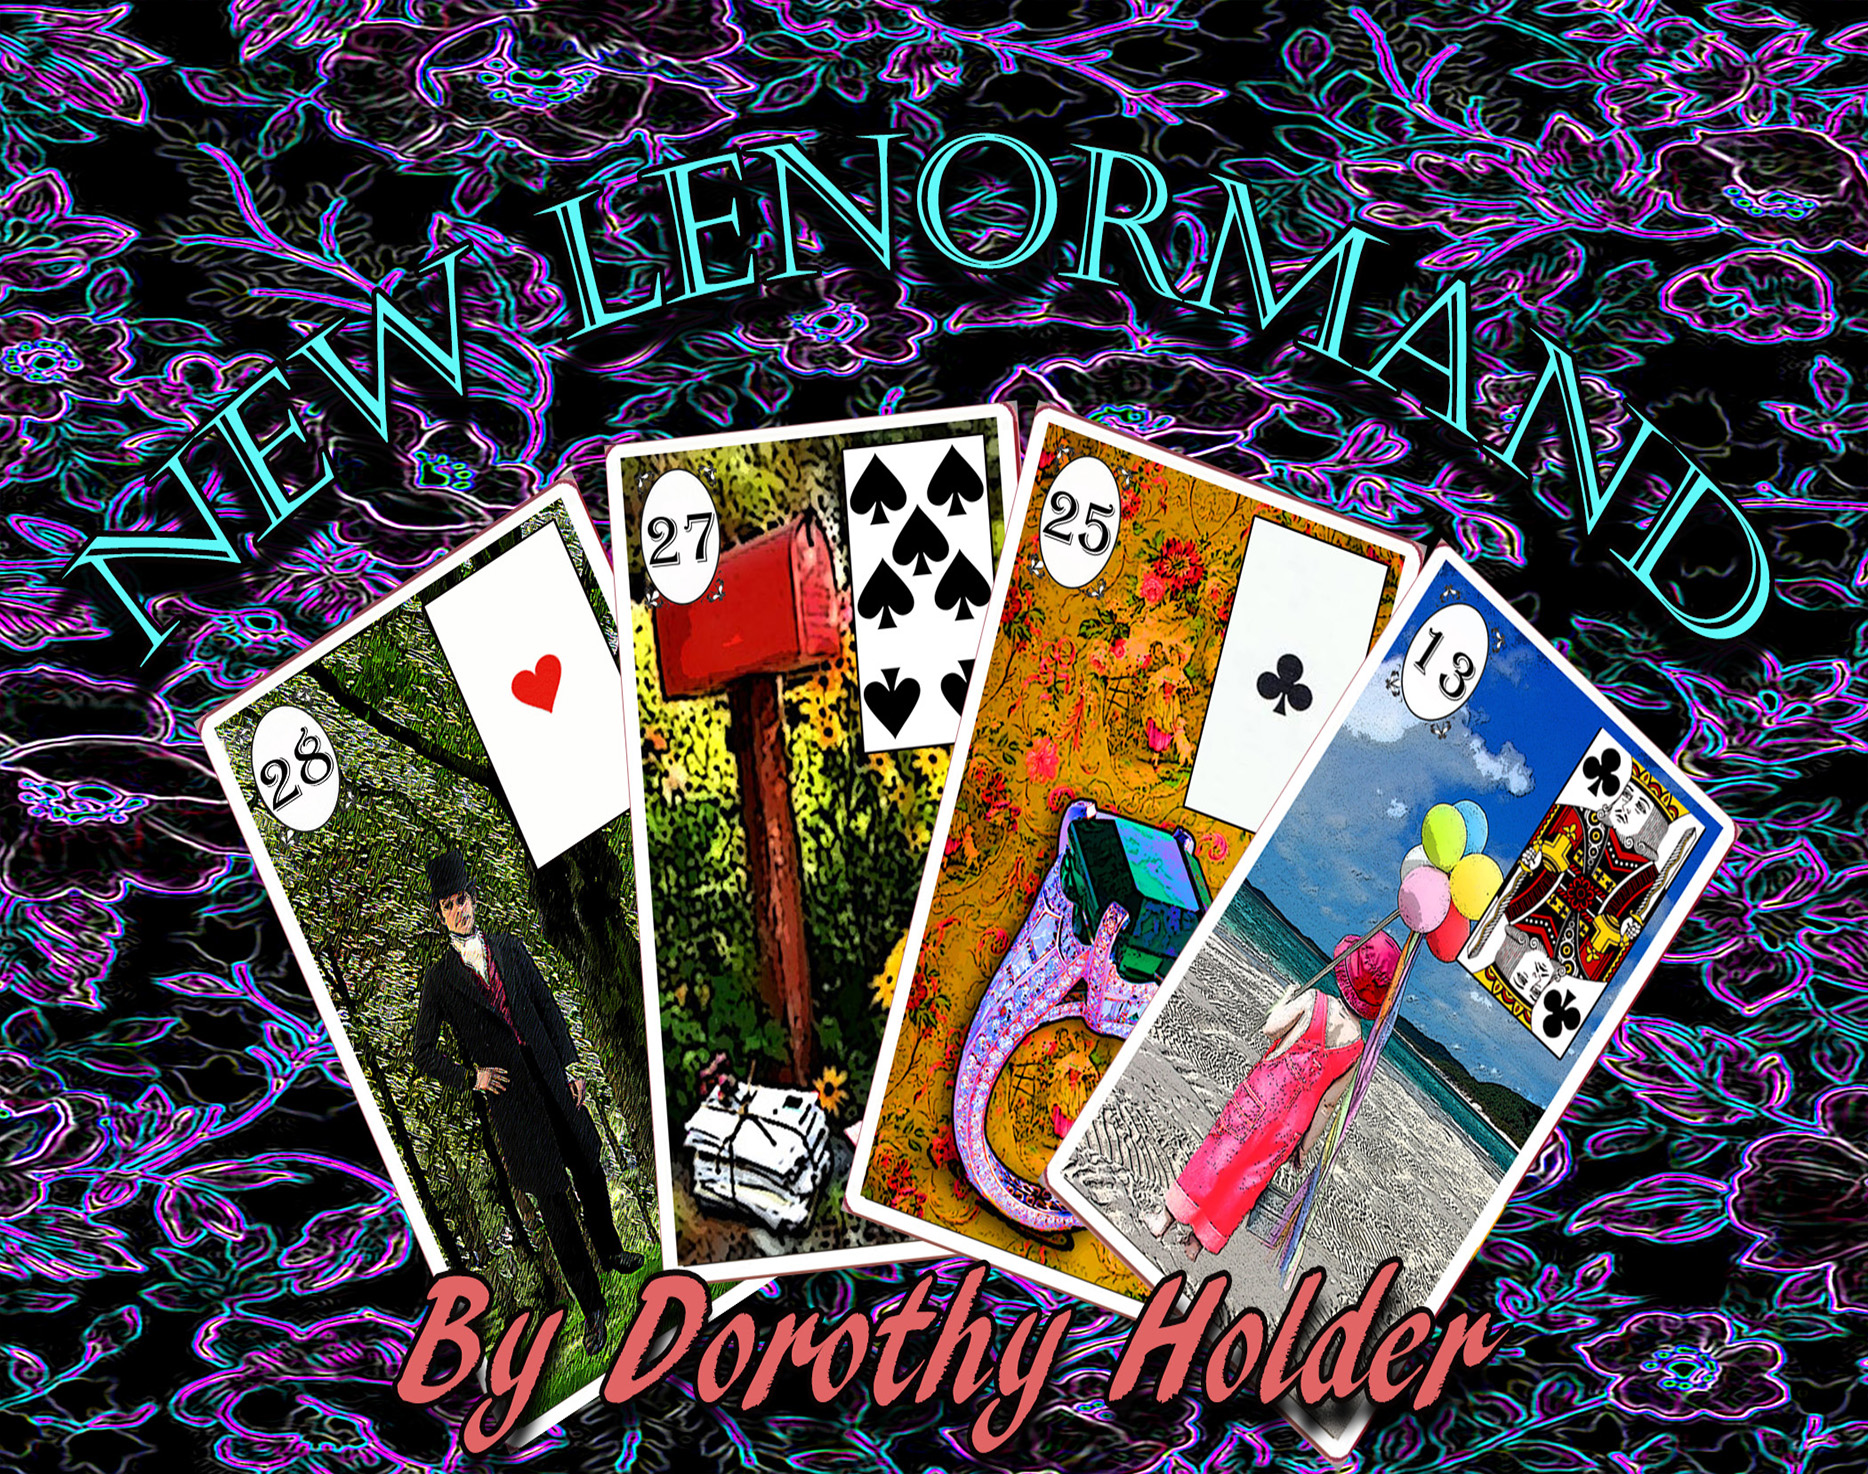 New Lenormand is true to form with modern imagery